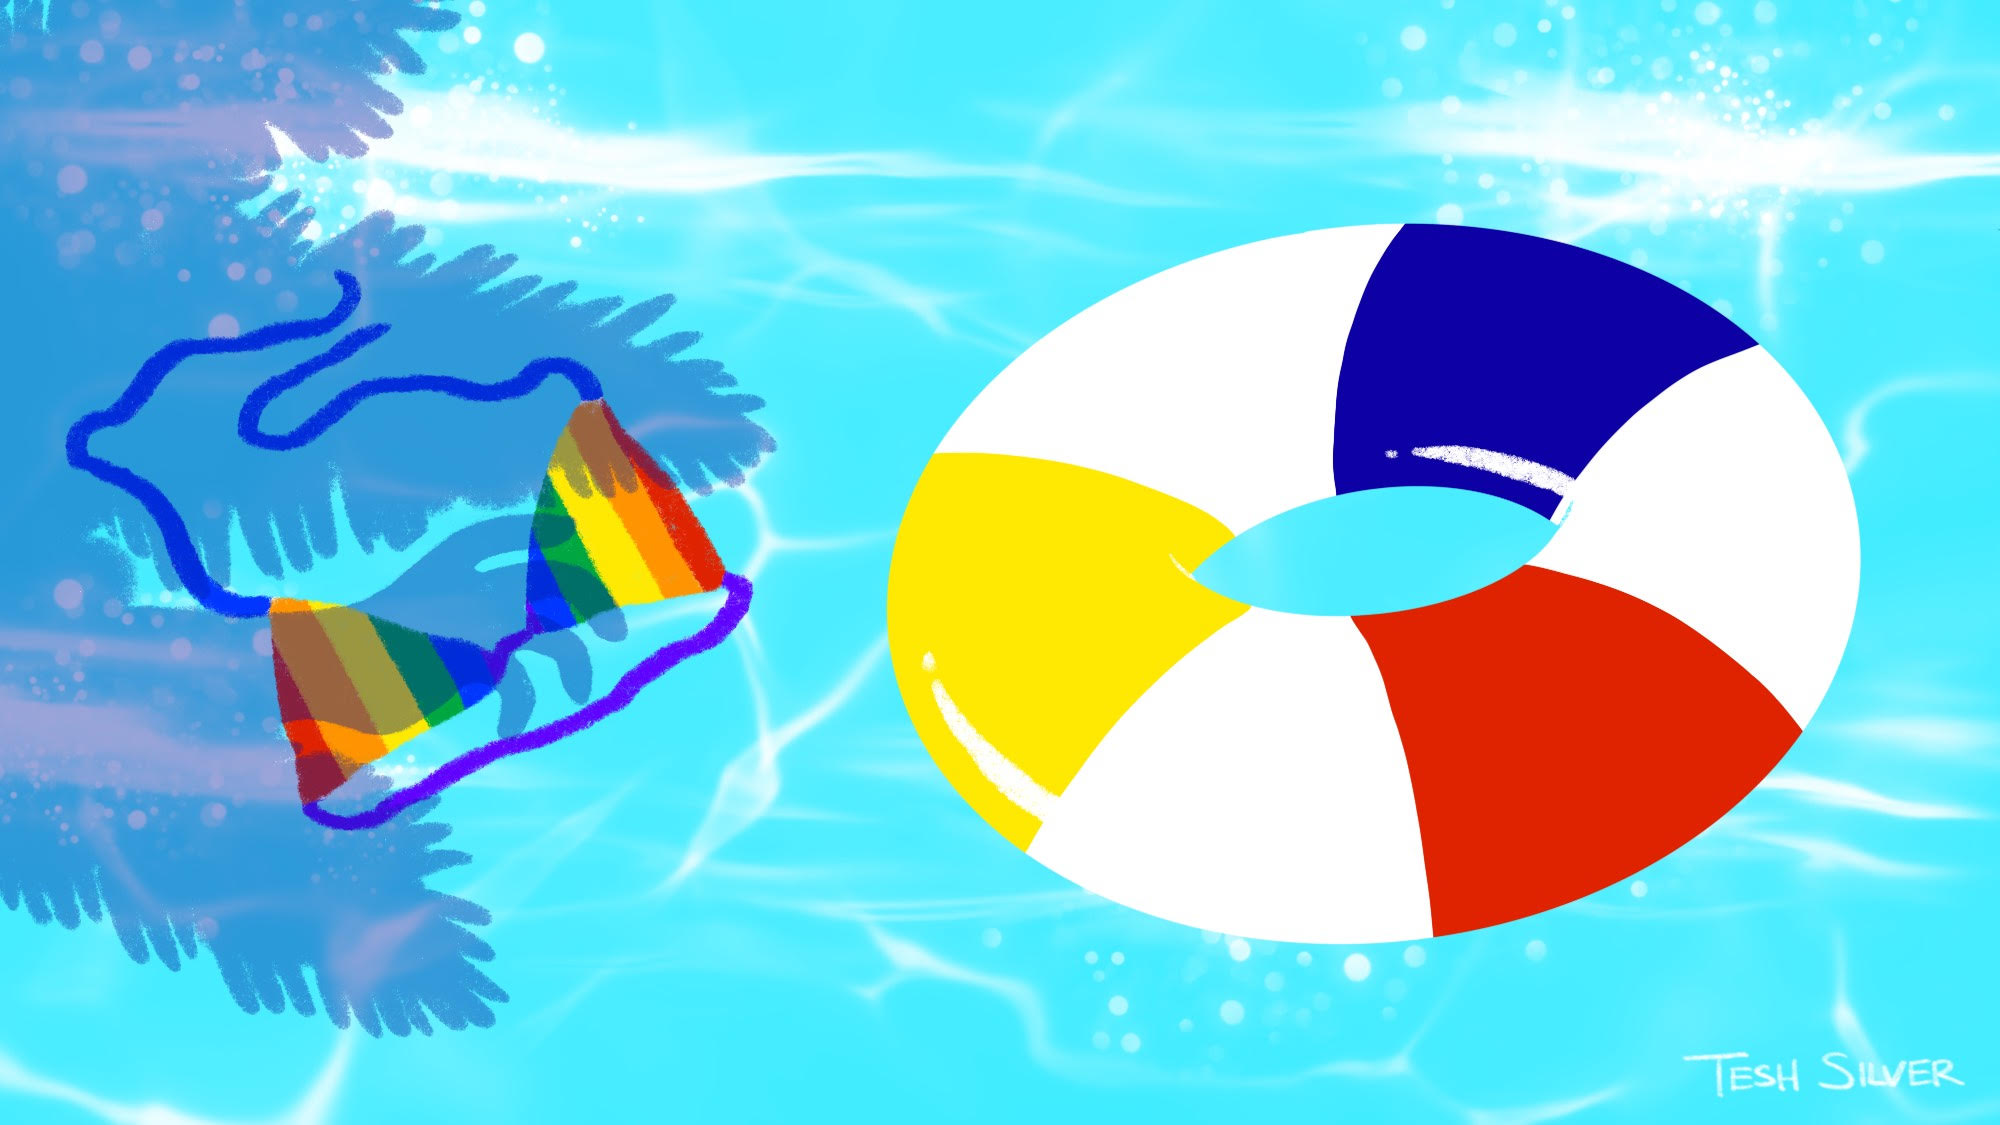 Featured image: A digital painting of a pool with a doughnut-shaped pool float, and a rainbow-colored bikini floating in the pool next to it. Illustration by Teshika Silver.